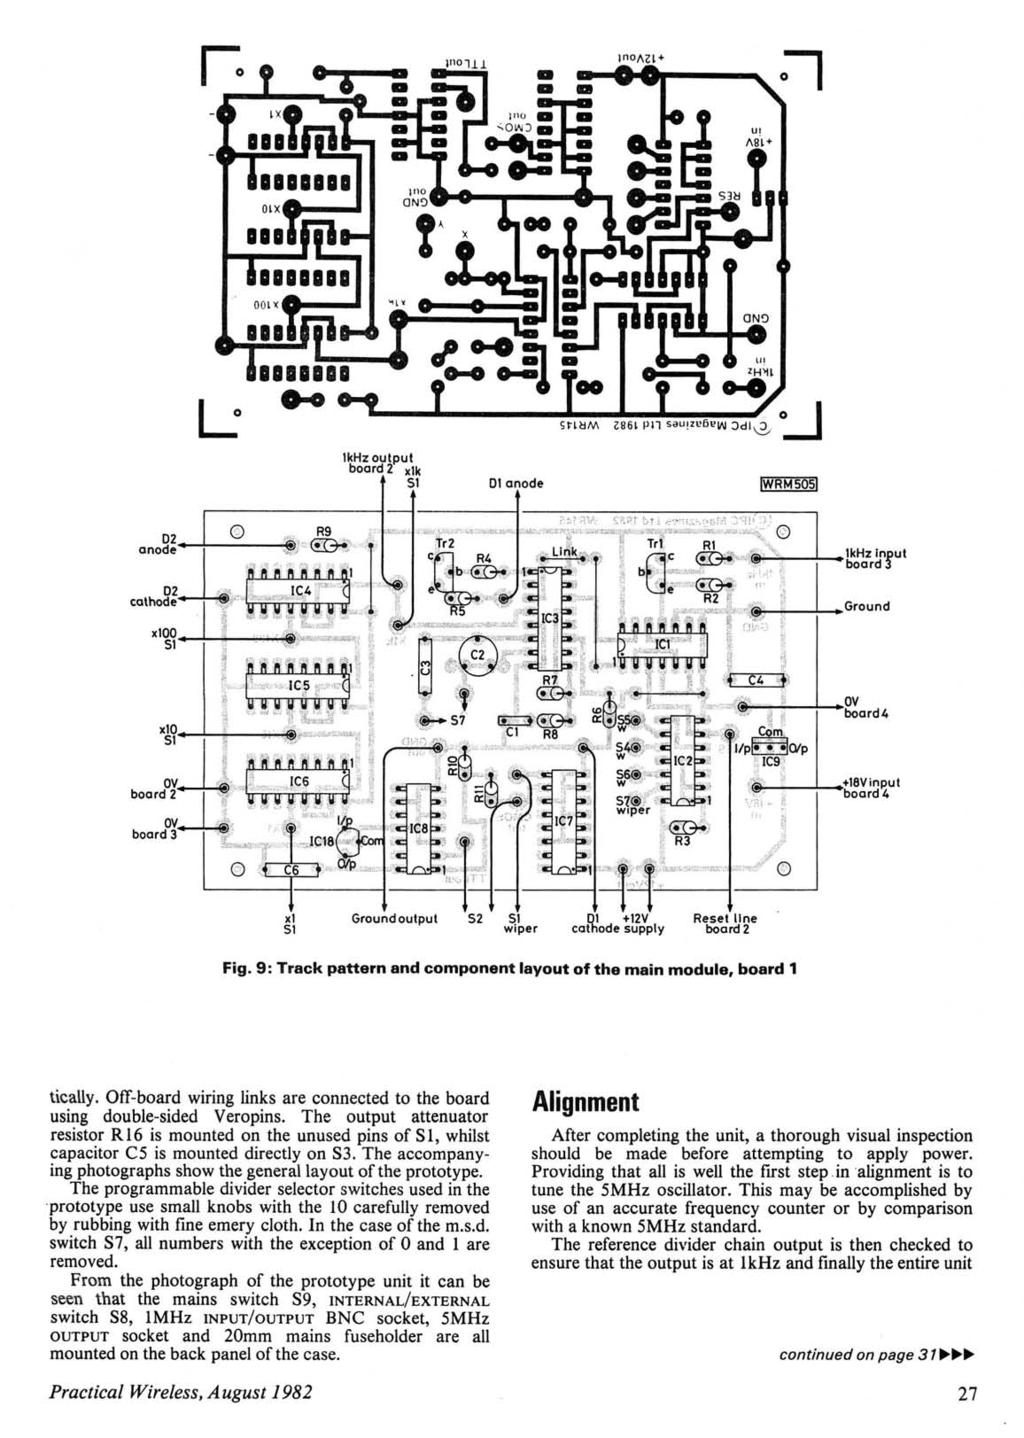 - - 1kHz output board 2 xlk 51 01 anode WRMSOS xl 51 51 wiper Reset line board 2 Fig. 9: Track pattern and component layout of the main module, board 1 tic ally.